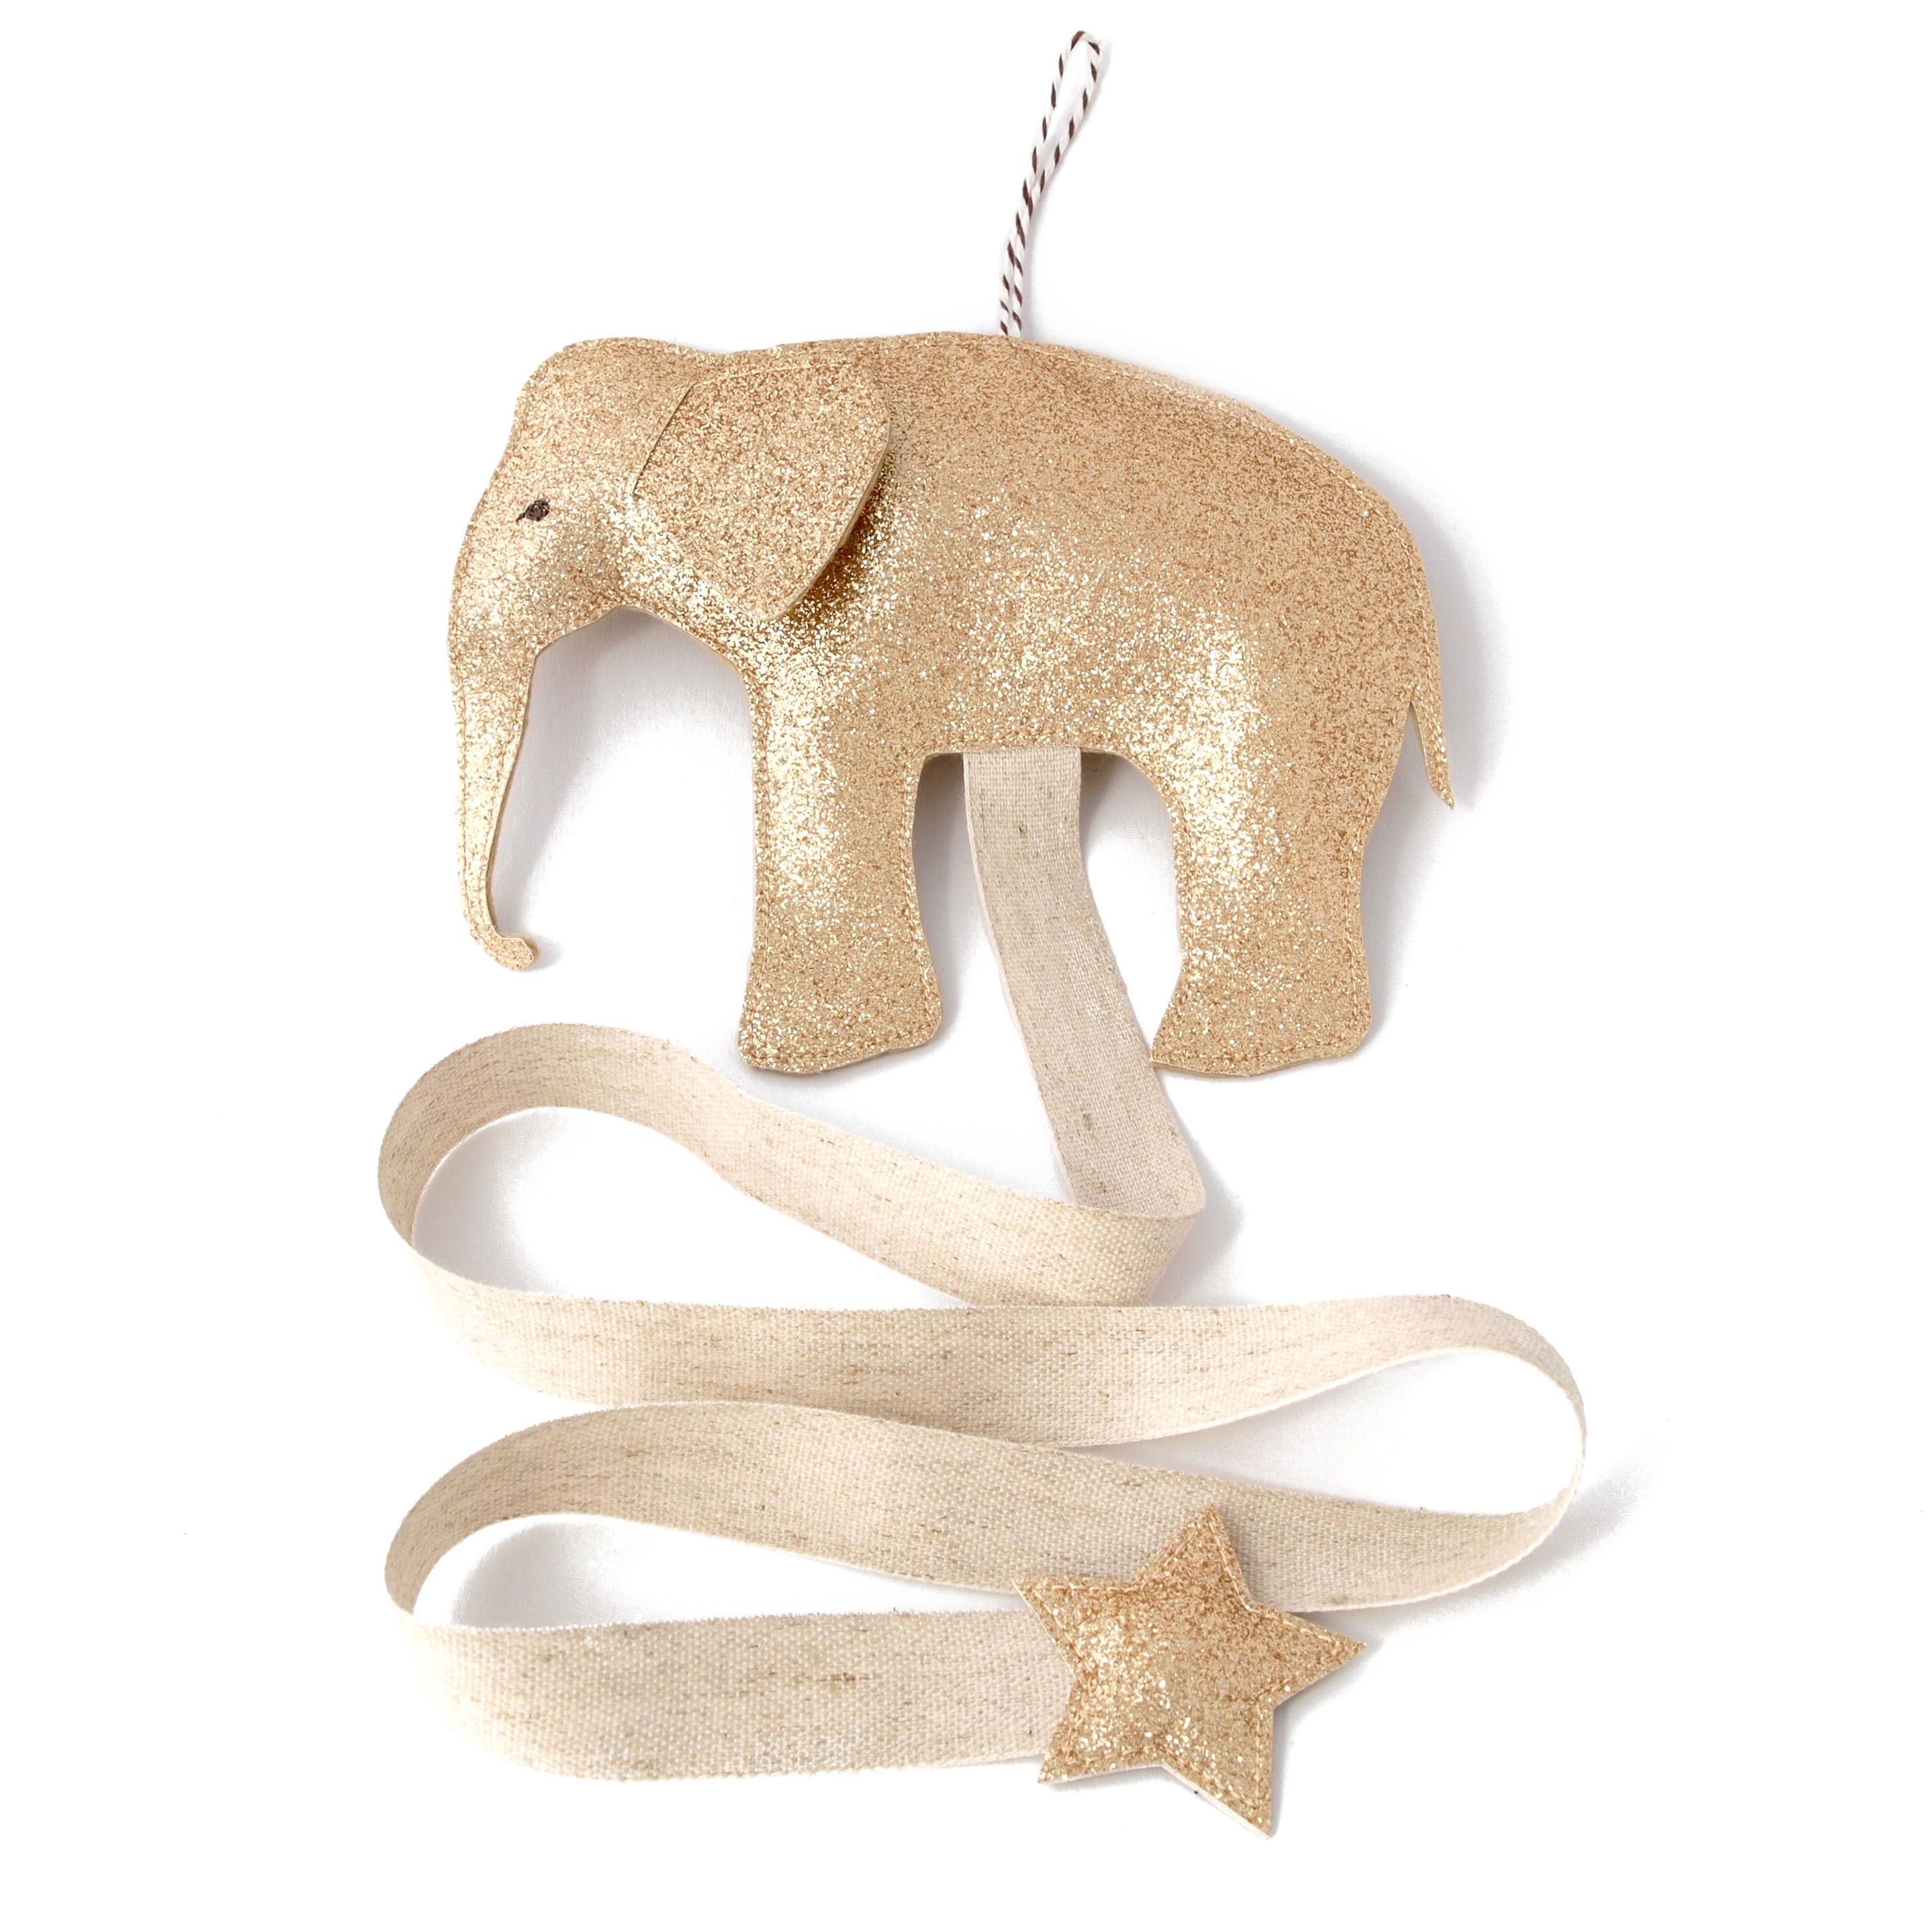 Hair accessories organizer or hanger in the shape of an elephant. A sweet and unique addition to your daughter's room.